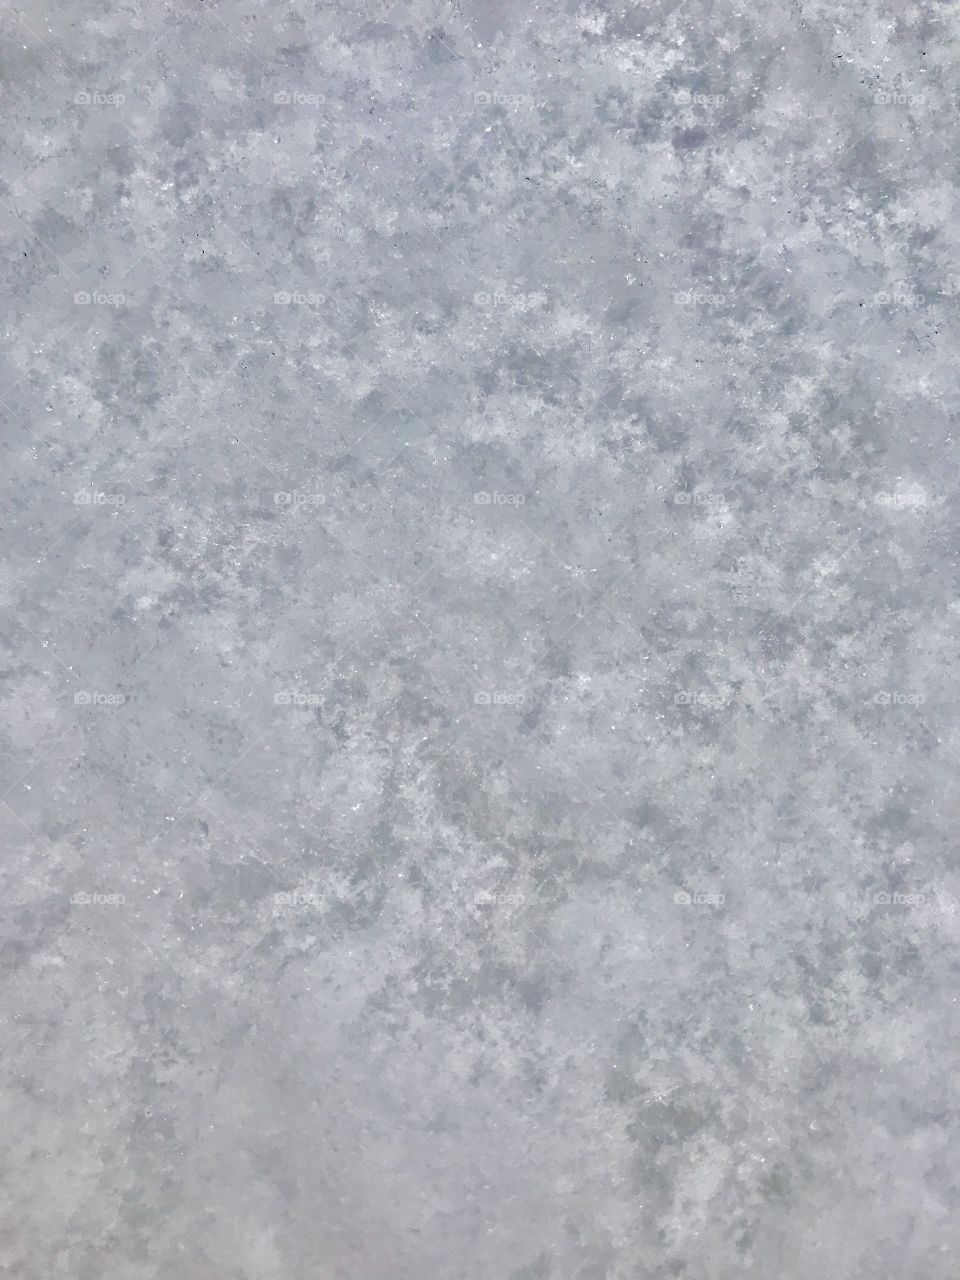 Snow, up close and personal 